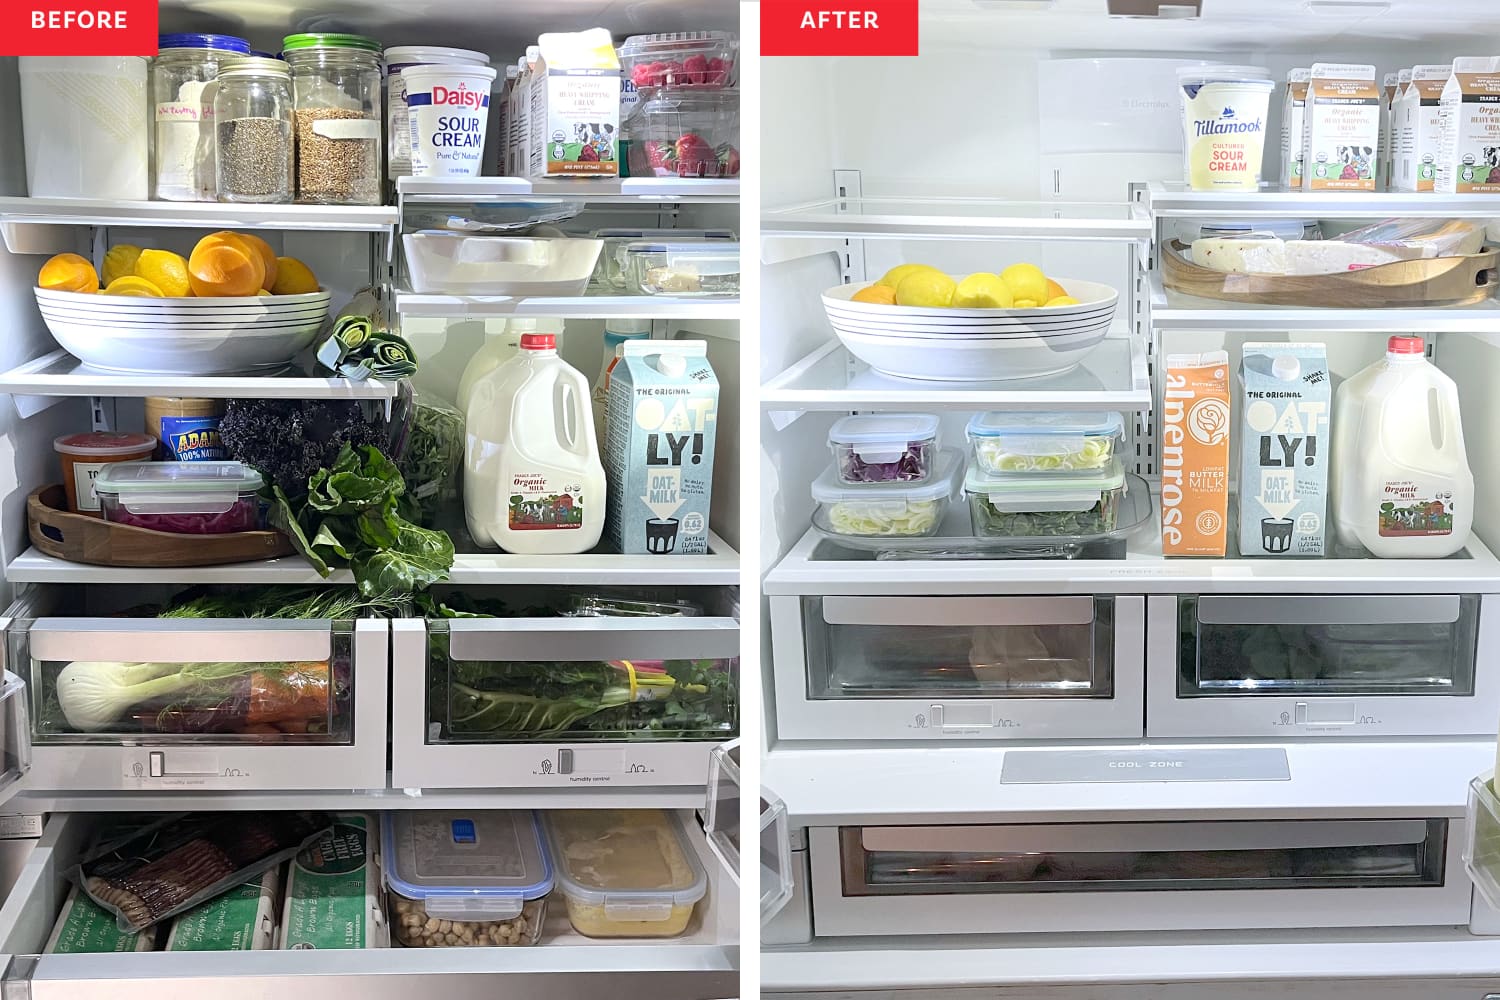 7 Pro Organizer Tips That Tripled the Space in My Fridge